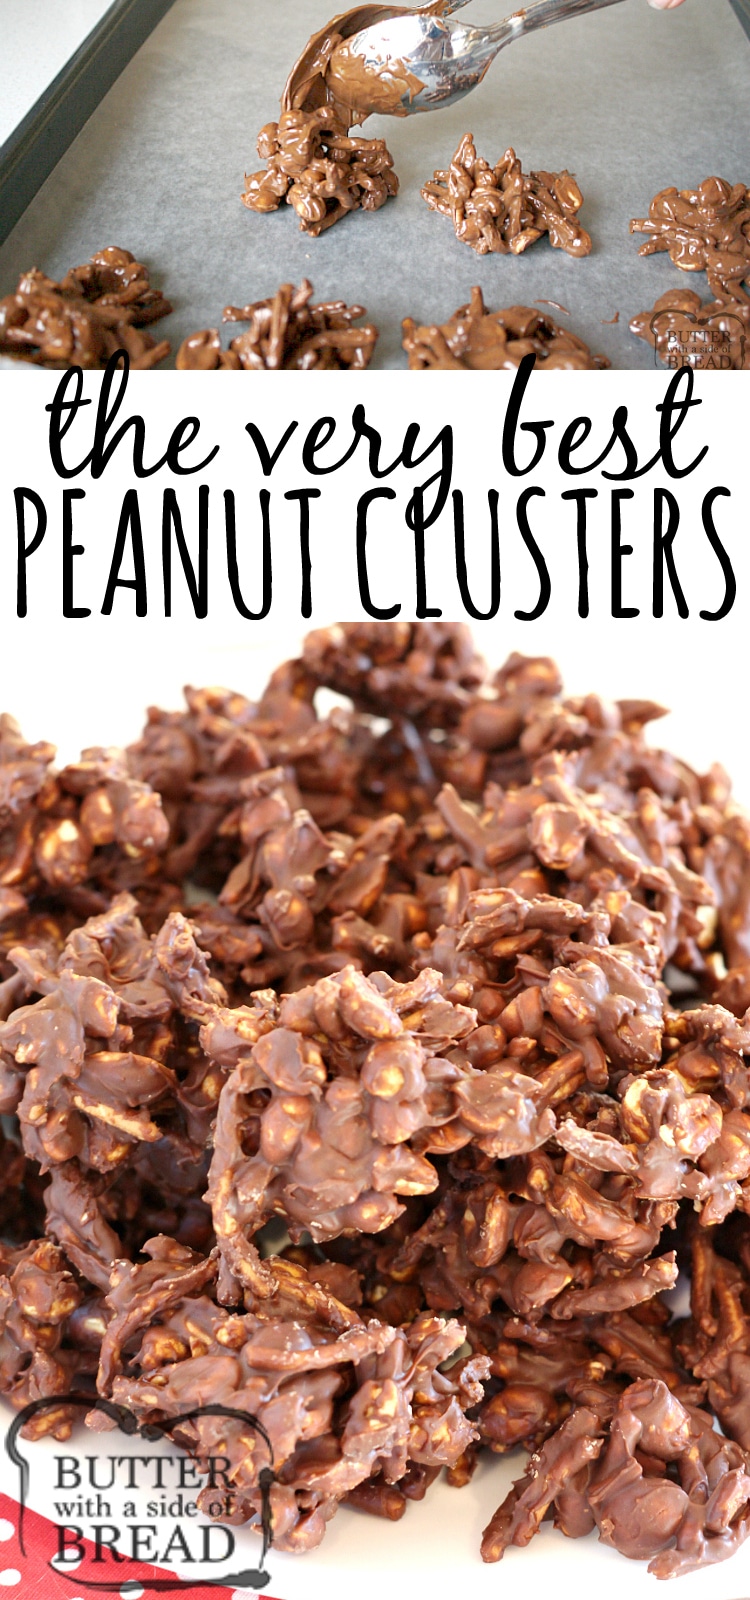 The best Chocolate Peanut Cluster recipe that I've ever tried! Made with only 4 ingredients- chocolate chips, butterscotch chips, peanuts and chow mein noodles. No baking involved and you can make a whole batch in less than 10 minutes!